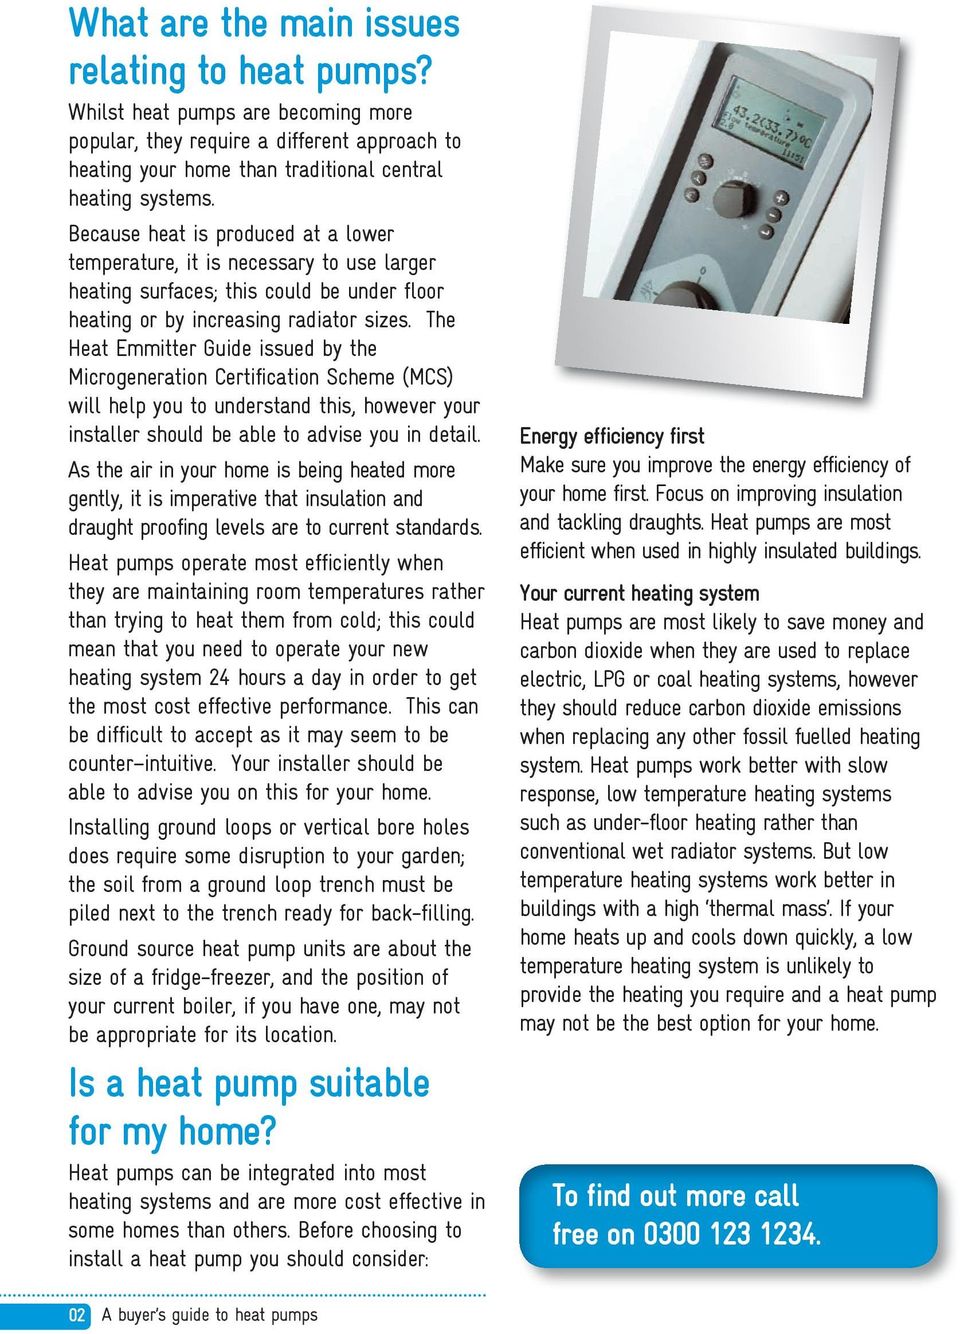 The Heat Emmitter Guide issued by the Microgeneration Certification Scheme (MCS) will help you to understand this, however your installer should be able to advise you in detail.